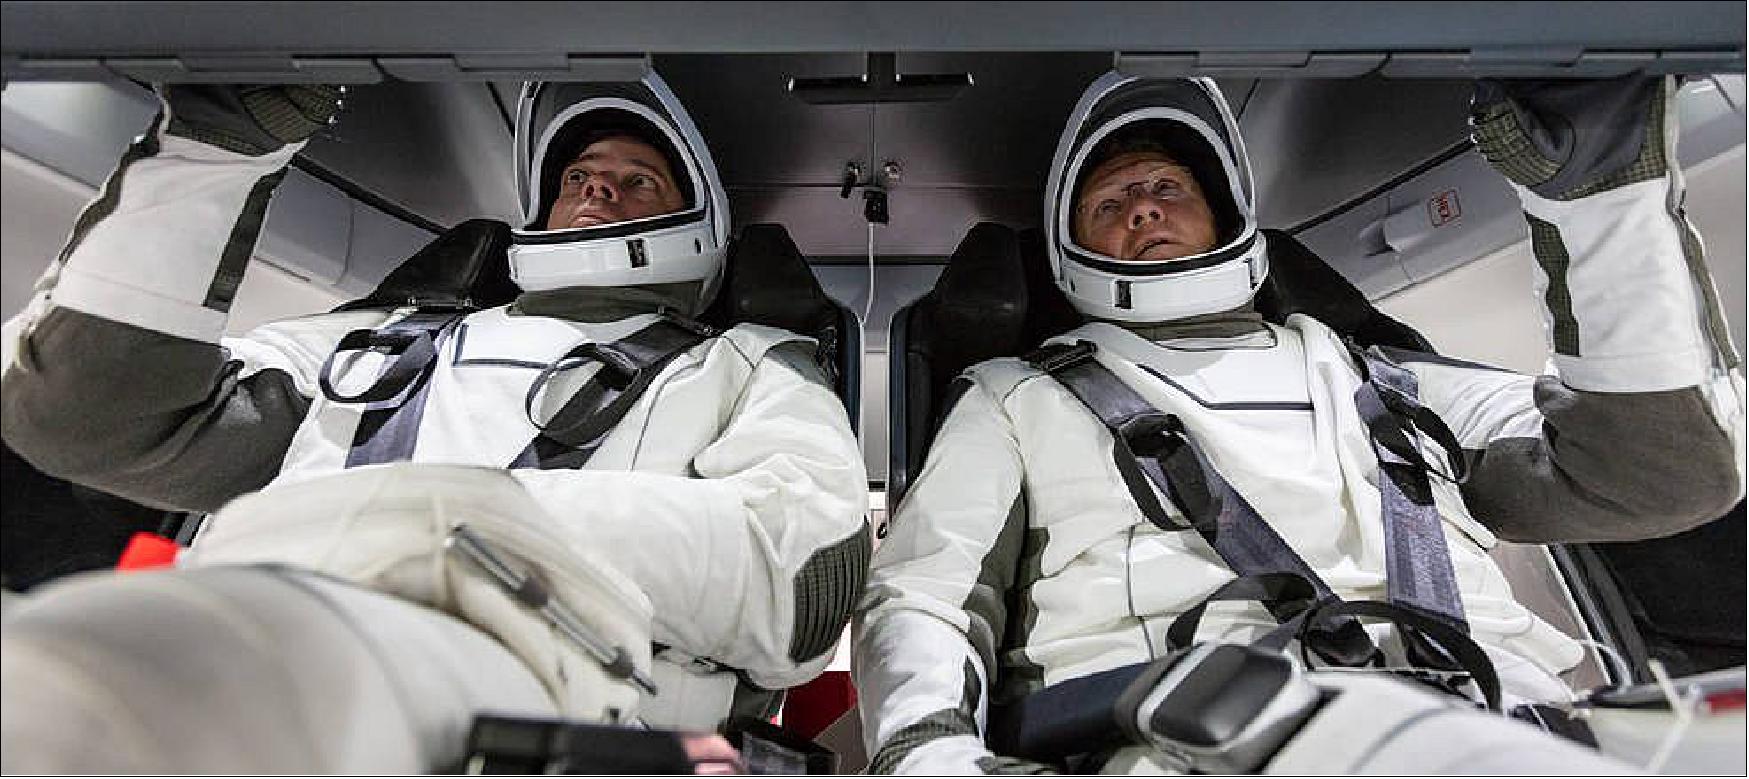 Figure 22: NASA astronauts Doug Hurley and Bob Behnken familiarize themselves with SpaceX’s Crew Dragon, the spacecraft that will transport them to the International Space Station as part of NASA’s Commercial Crew Program. Their upcoming flight test is known as Demo-2, short for Demonstration Mission 2. The Crew Dragon will launch on SpaceX’s Falcon 9 rocket from Launch Complex 39A at NASA’s Kennedy Space Center in Florida (image credit: NASA) 22)